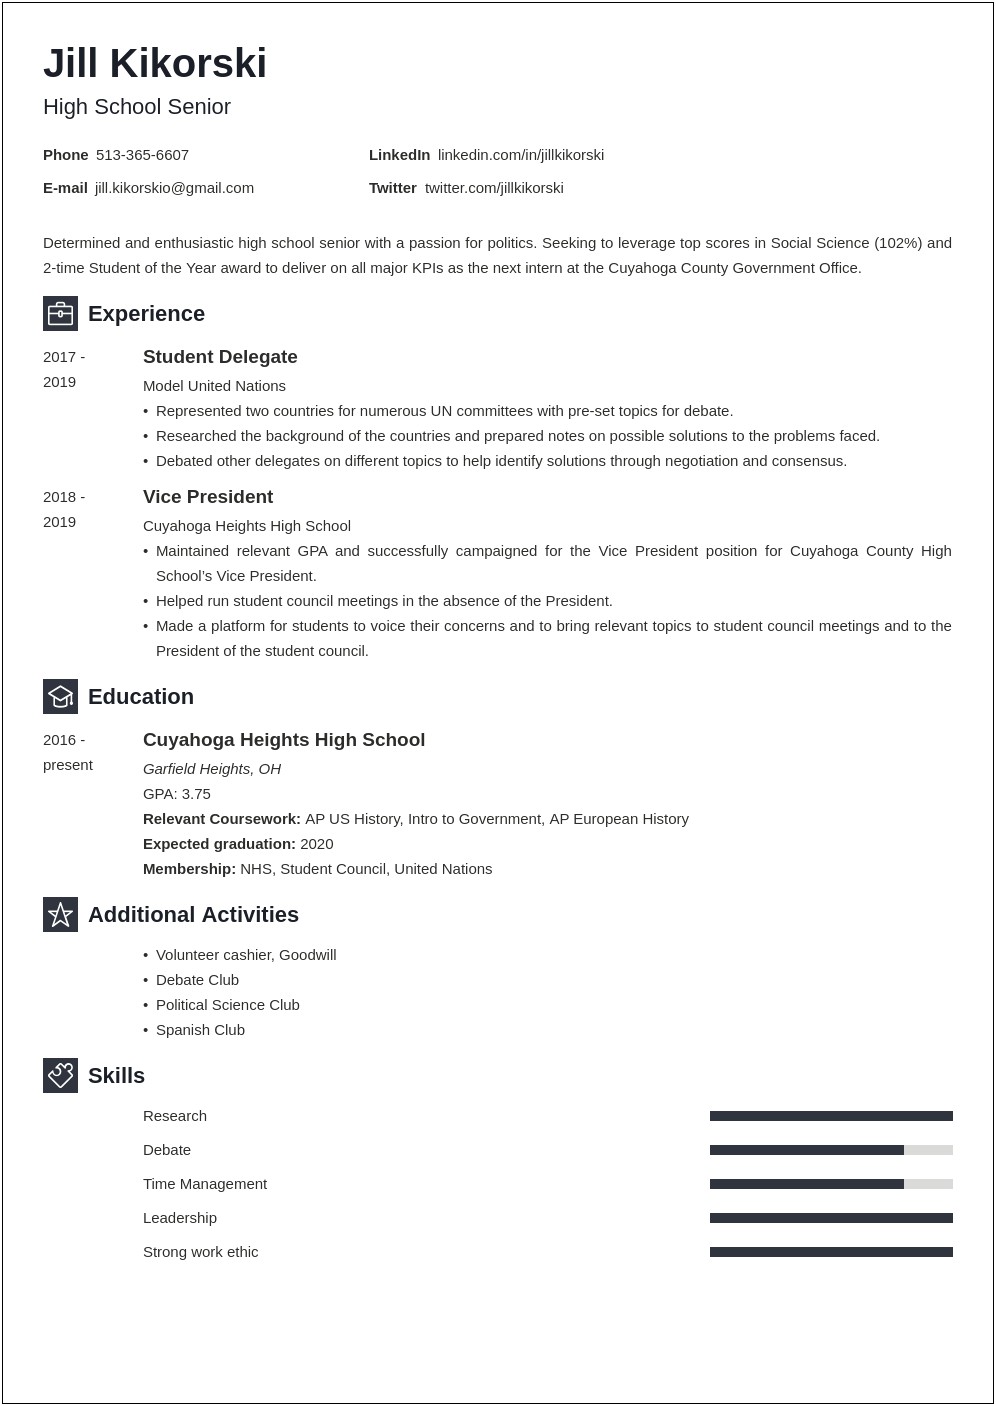 Resume Objectives For Temporary Summer Jobs